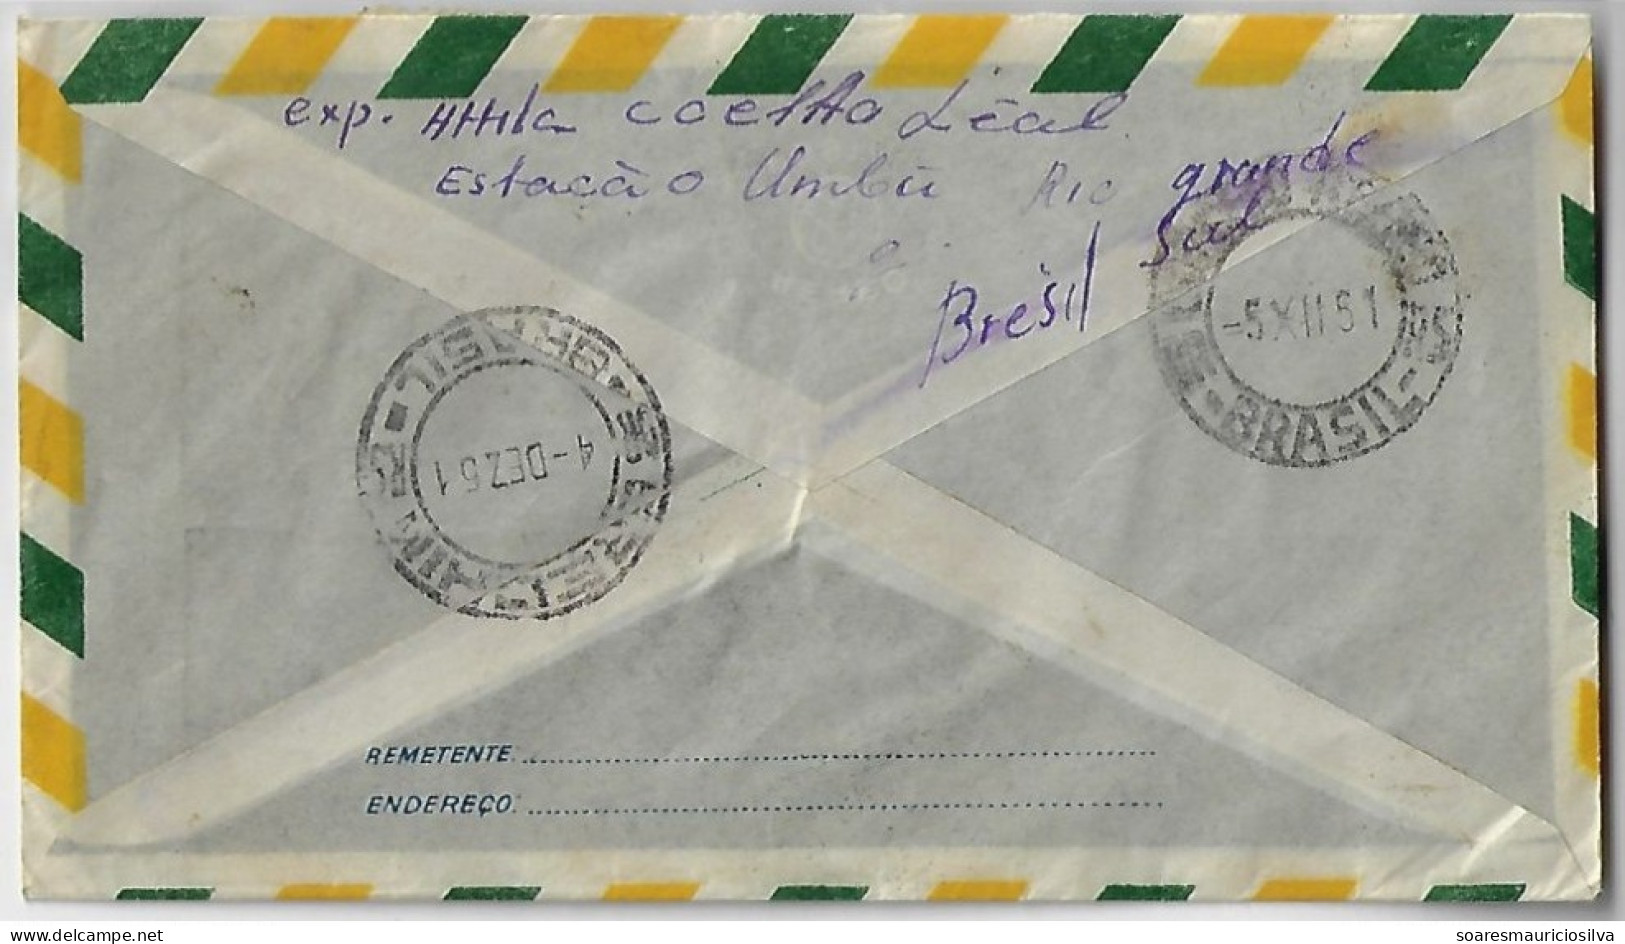 Brazil 1951 Cover Sent To Lausanne Switzerland Cancel Erechim + Airmail Stamp Orville Adalbert Derby & Floriano Peixoto - Covers & Documents